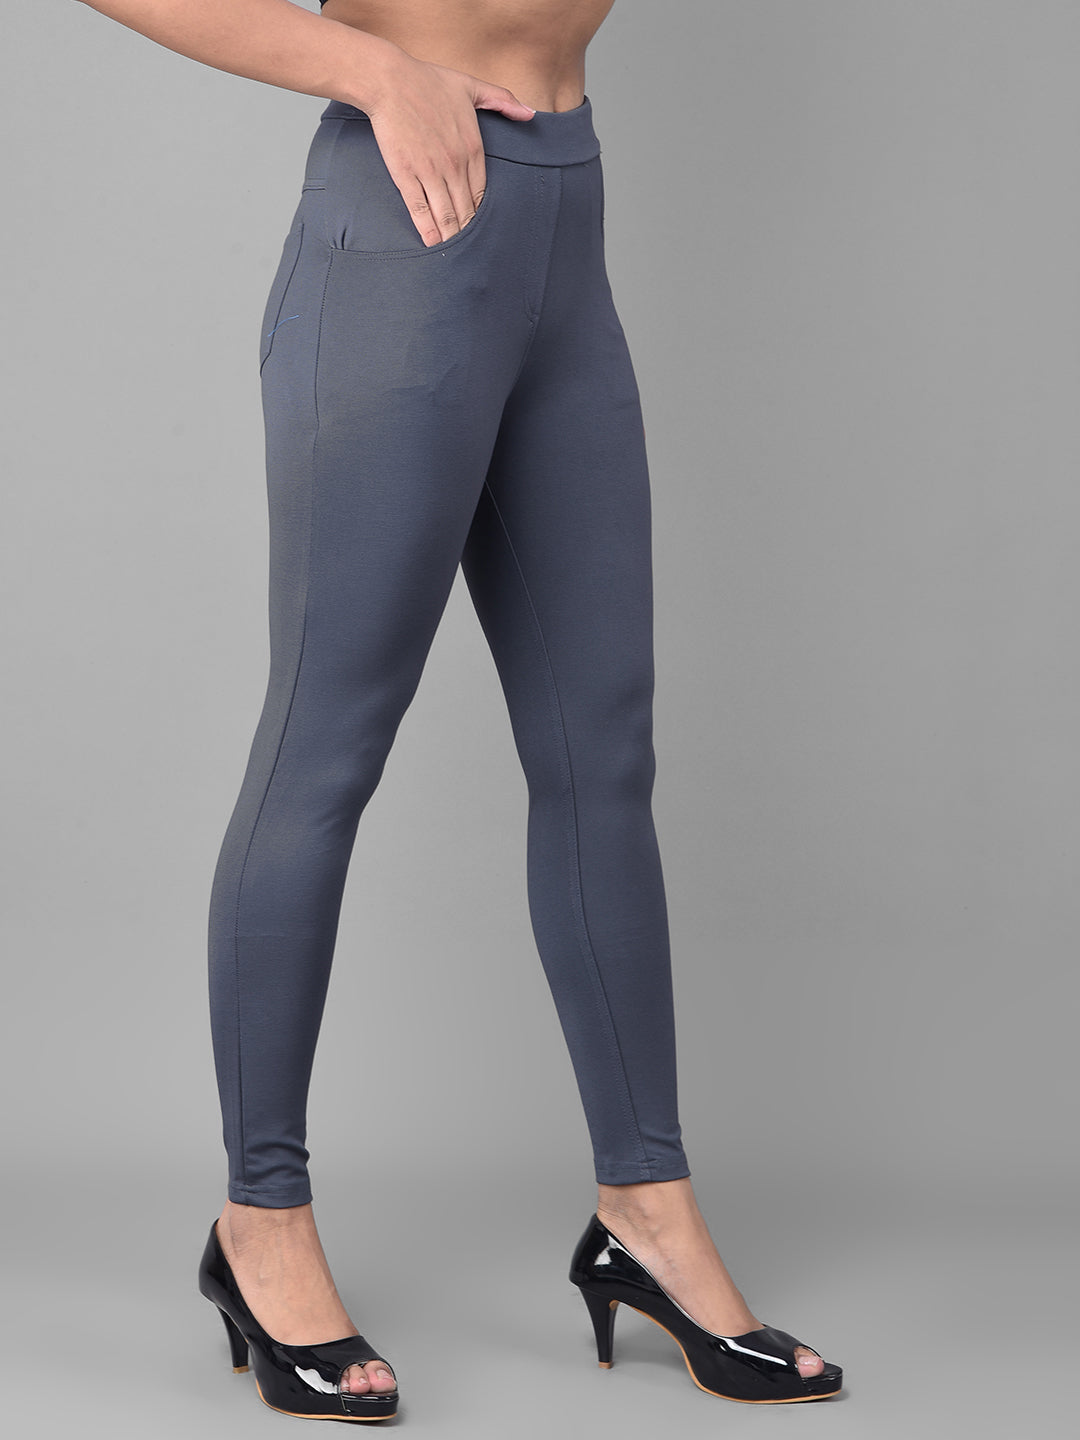 Comfort Lady Regular Fit Fashion Jeggings - Comfort Lady Private Limited